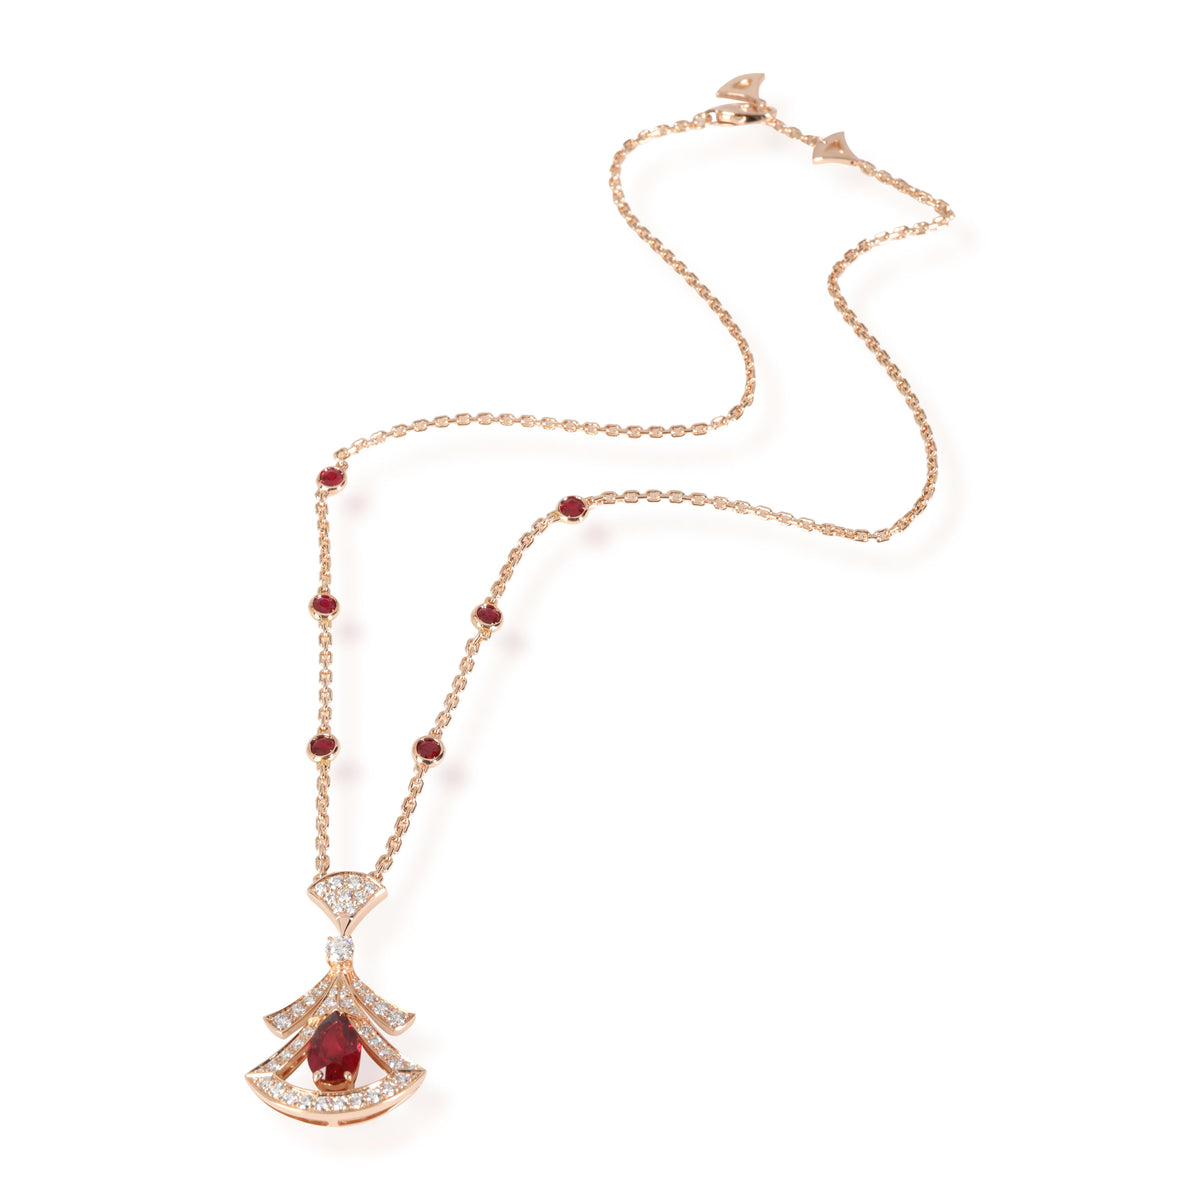 Rose gold DIVAS' DREAM Necklace with 1.01 ct Rubies,Pink Sapphires